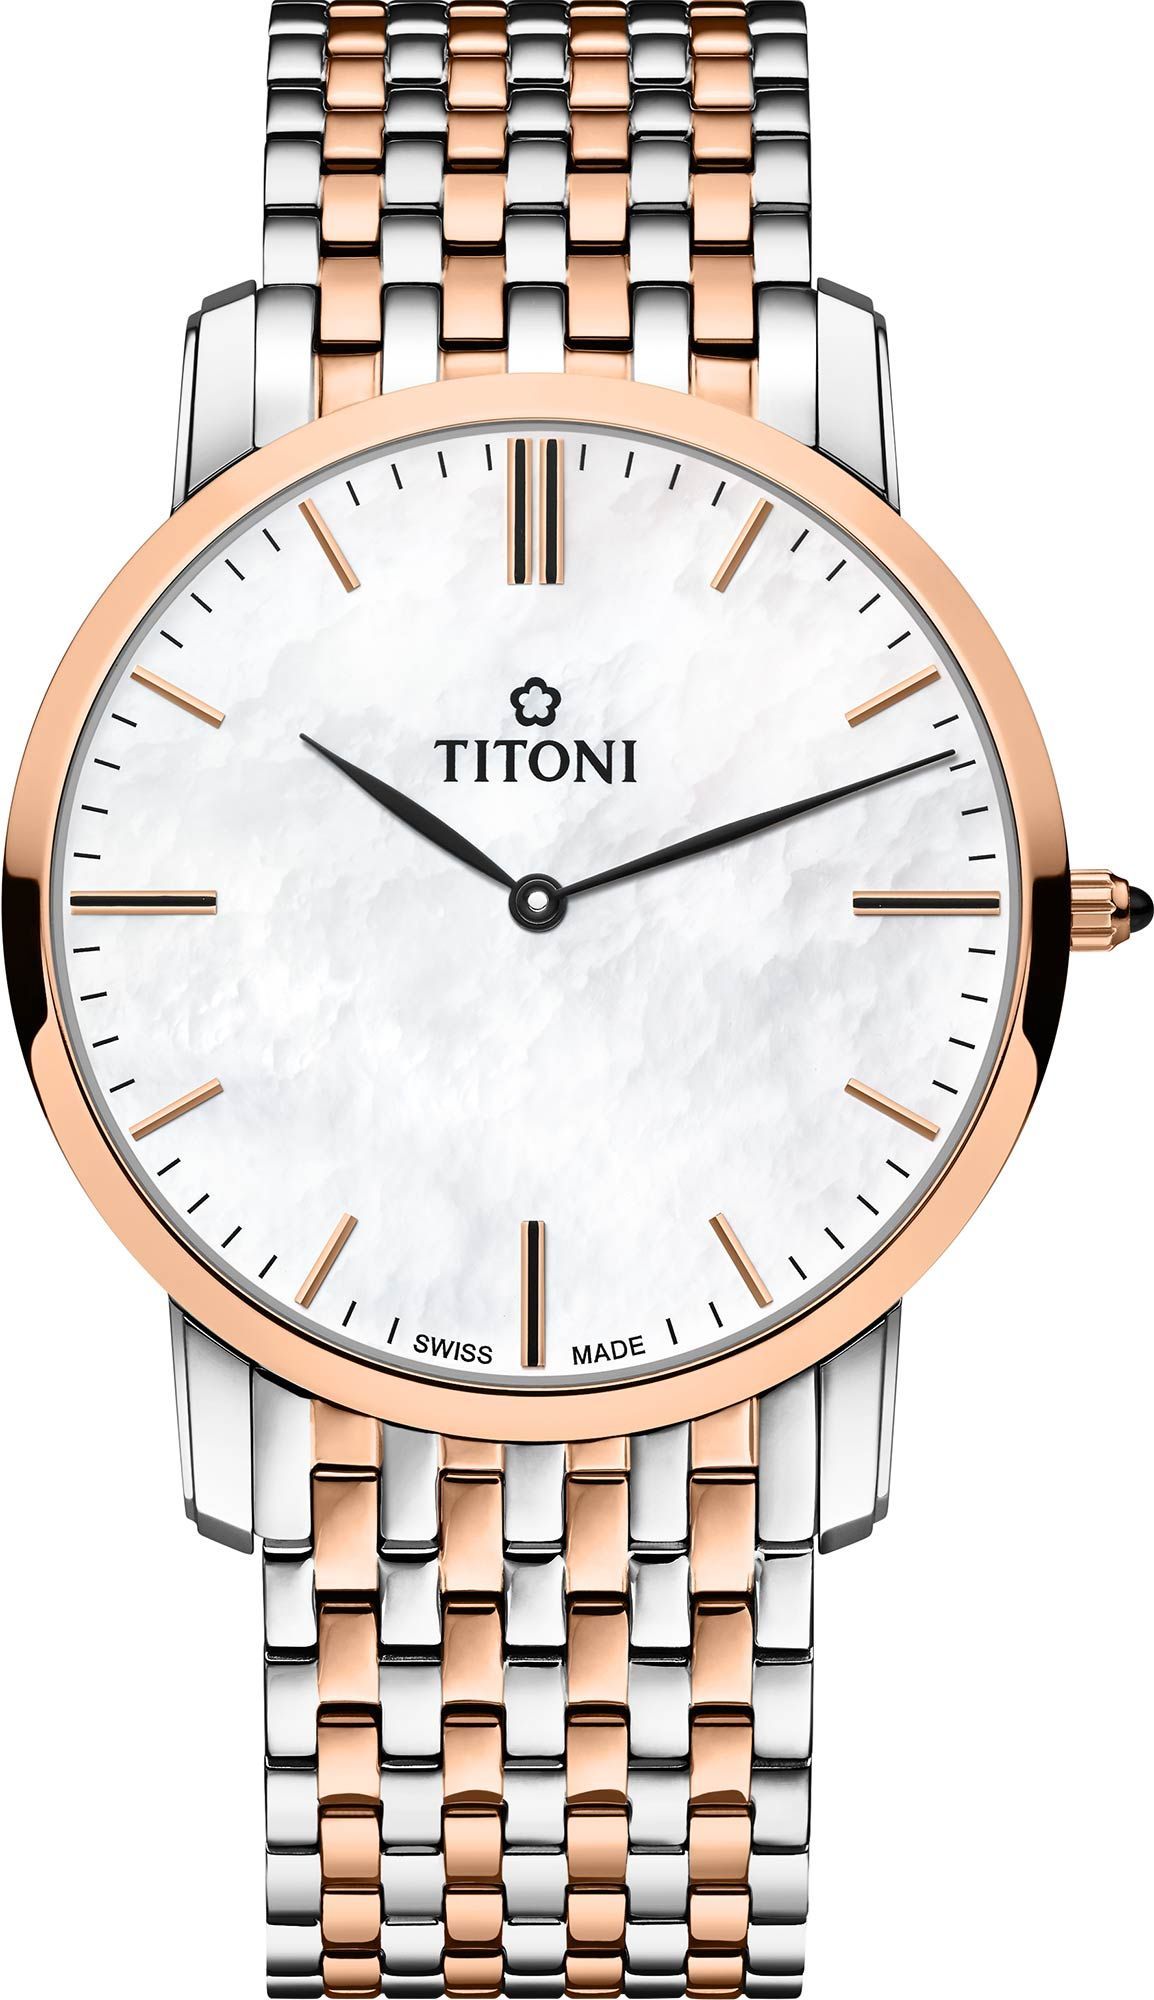 Titoni  38 mm Watch in MOP Dial For Men - 1